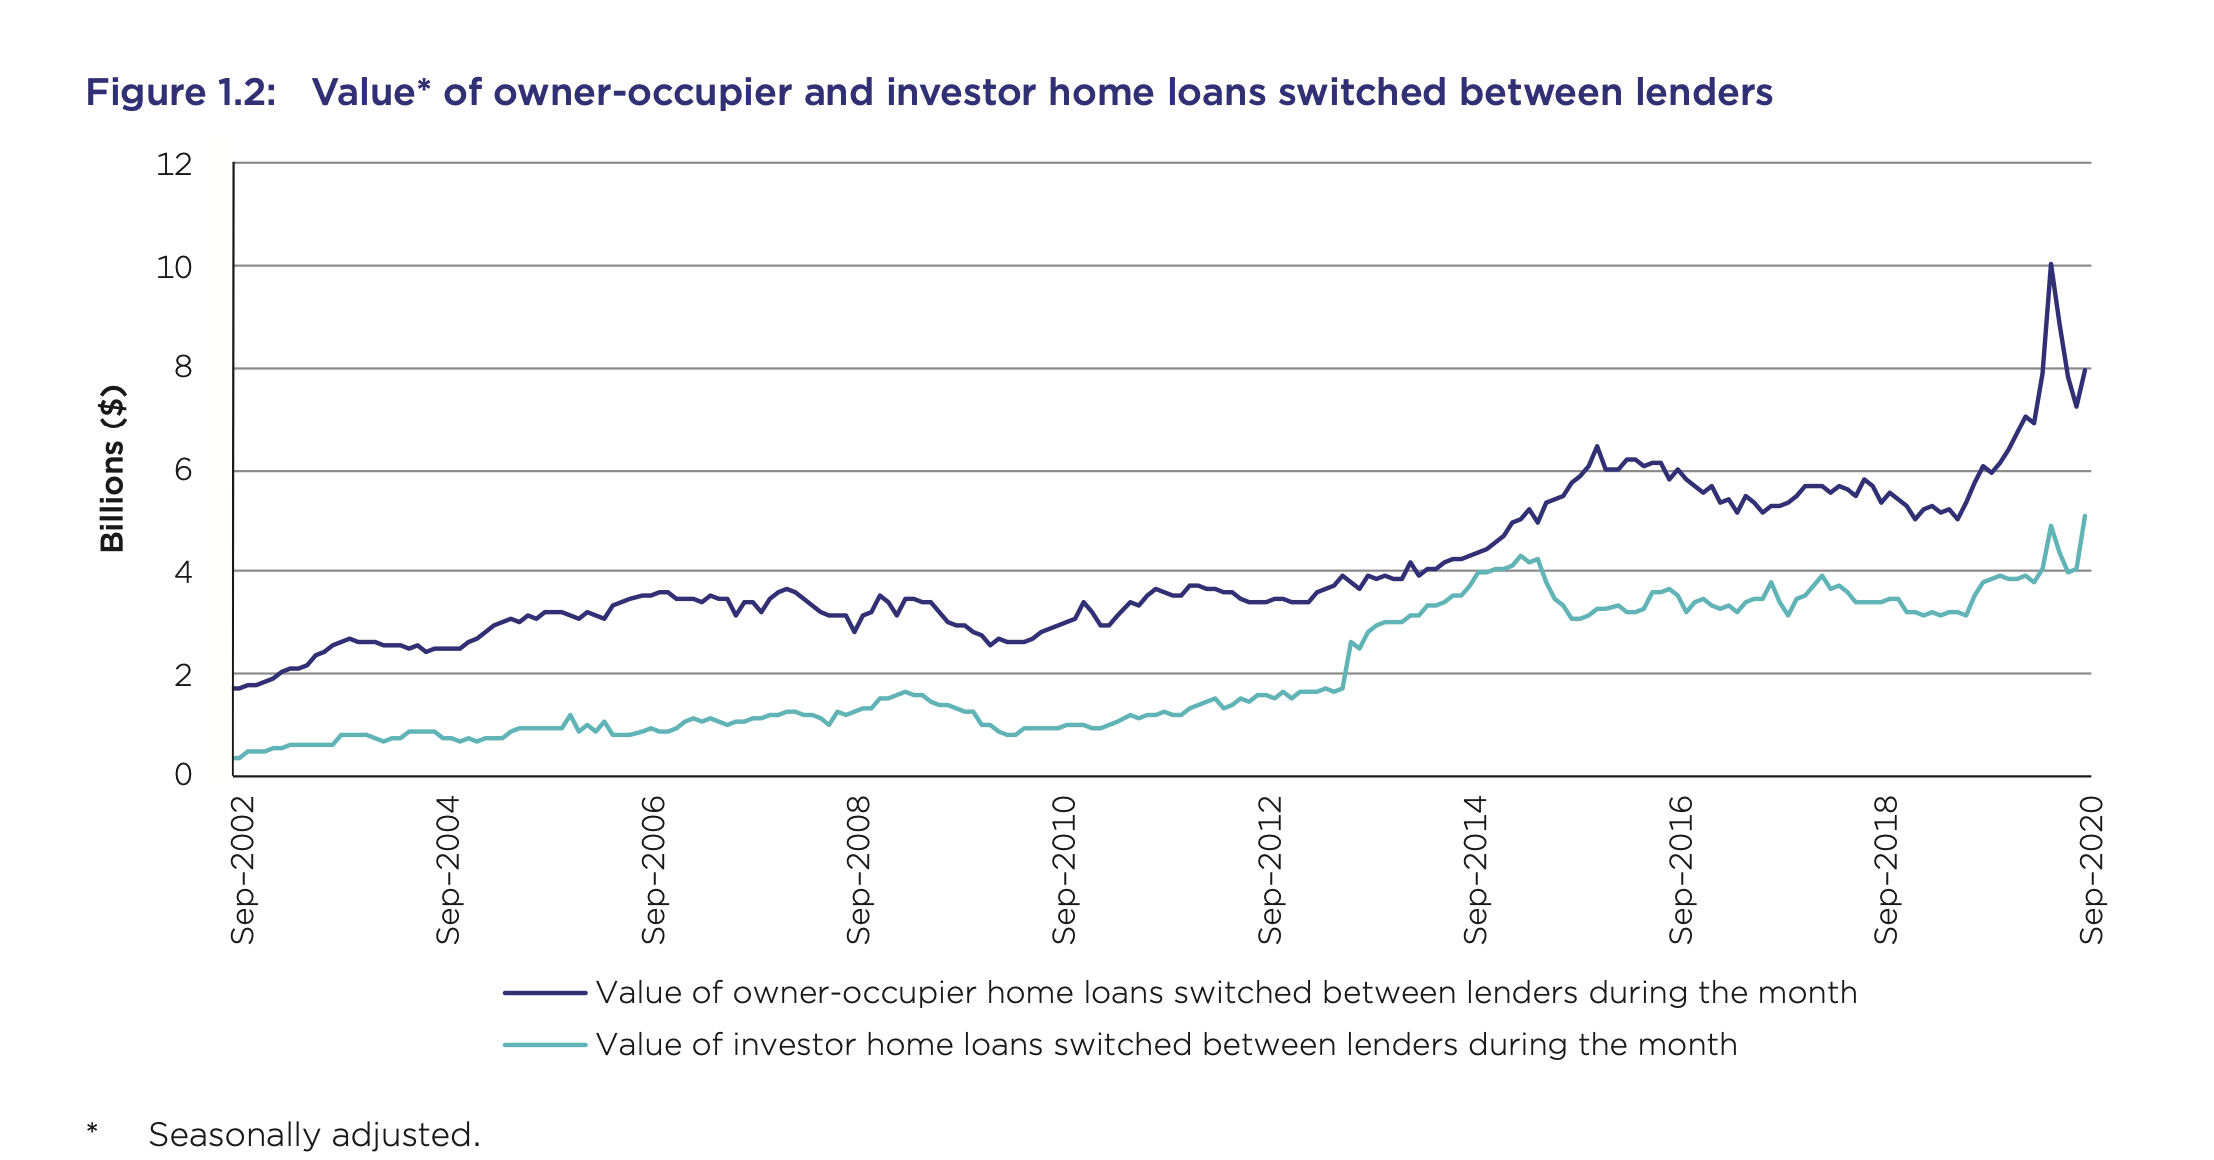 Figure 1.2: Value* of owner-occupier and investor home loans switched between lenders